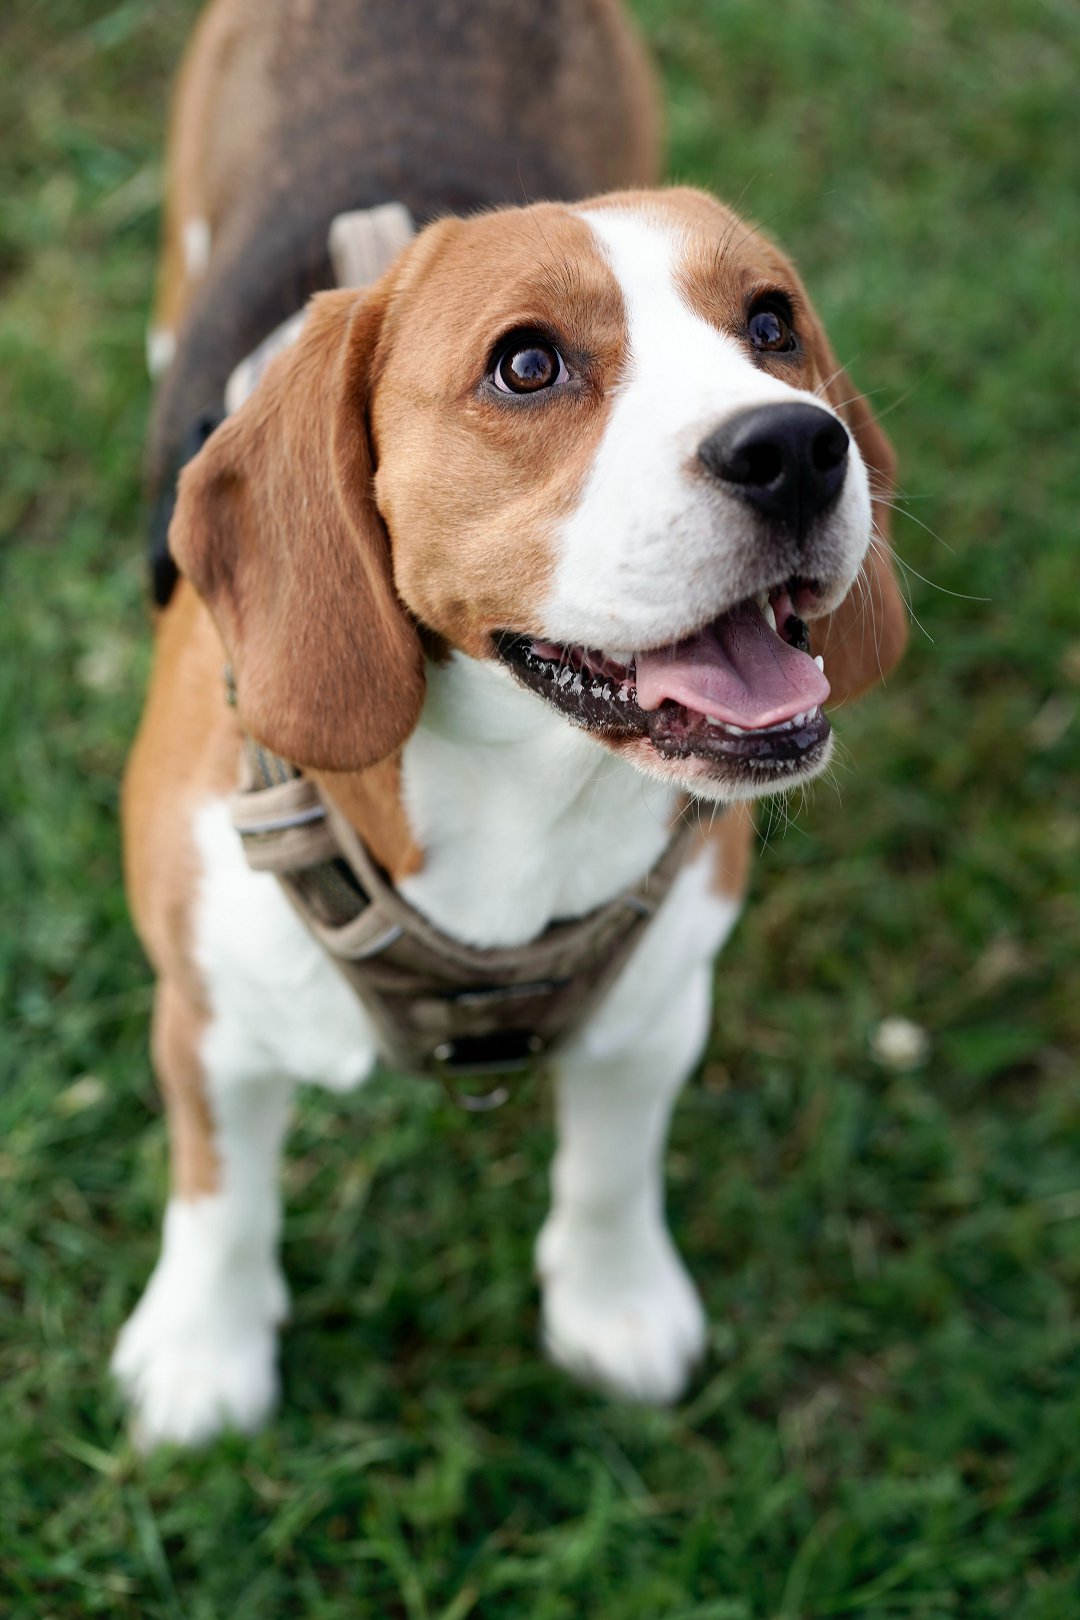 The Beagle’s Road to Recovery: How to Care for Your Pup After Dental Surgery